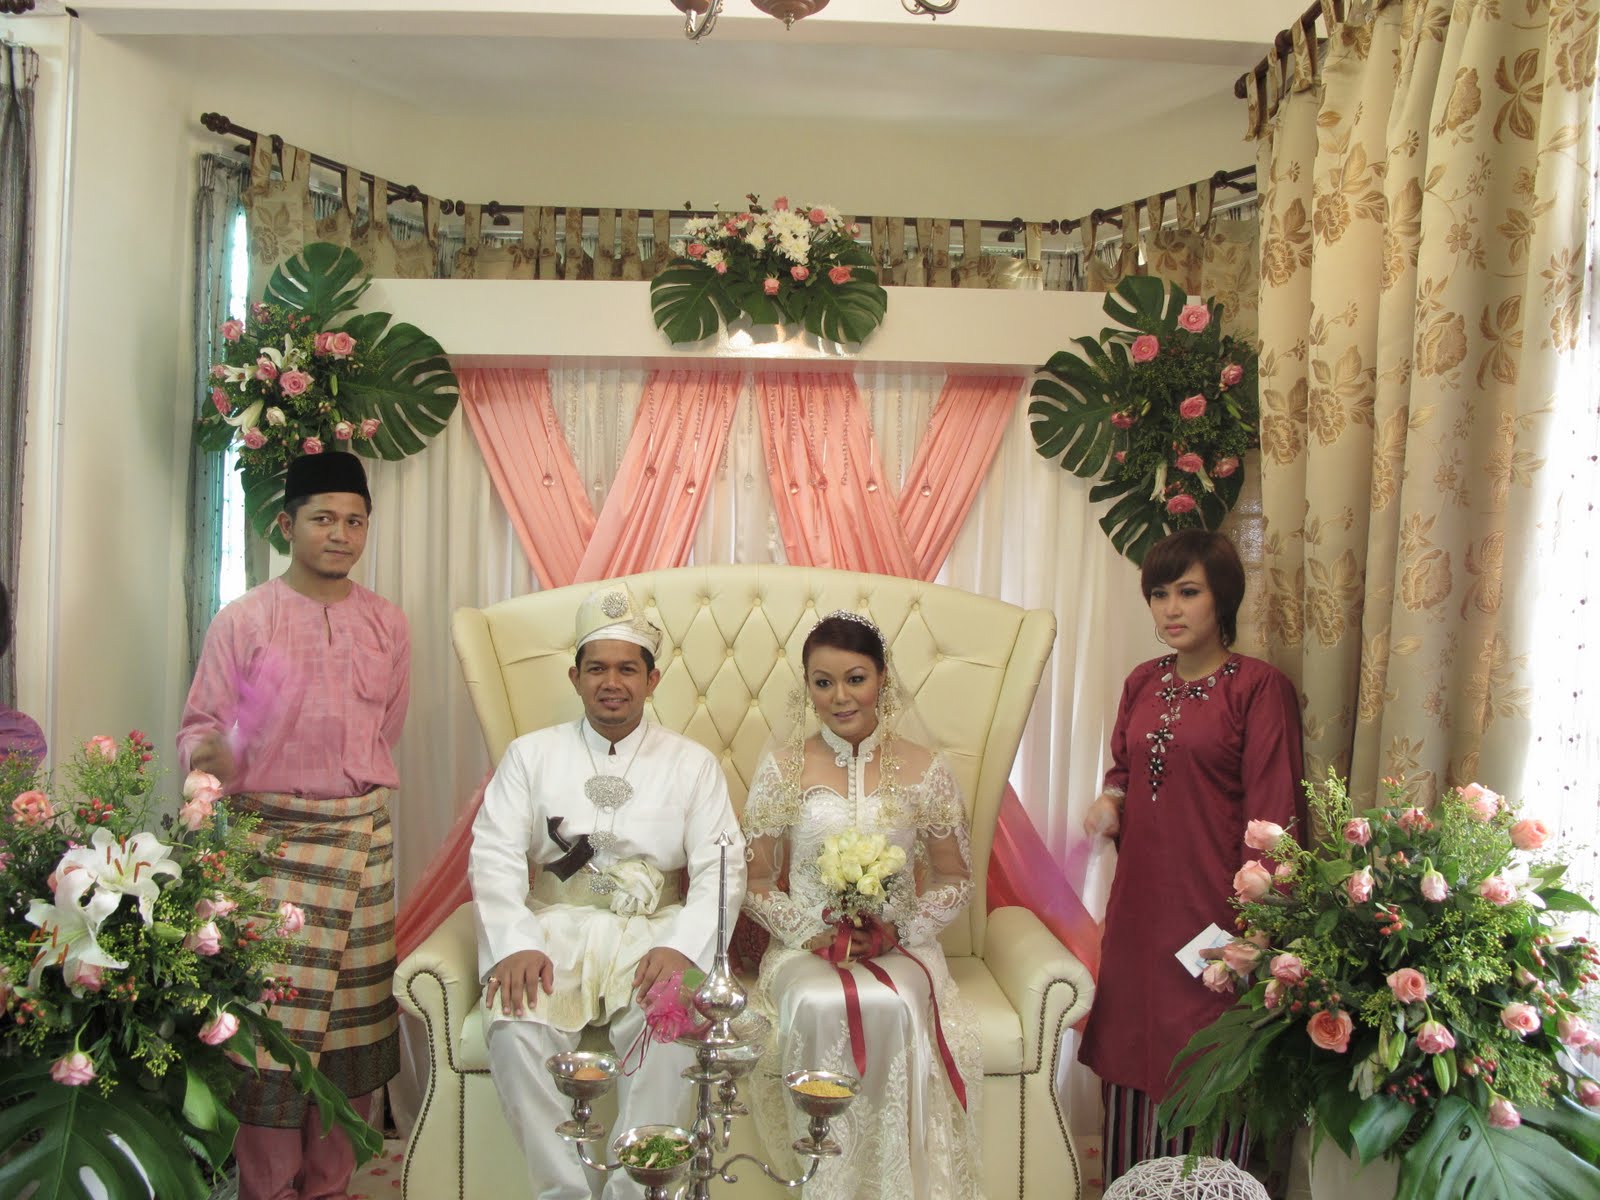 Nasi Lemak Lover: Attended a Malay Wedding